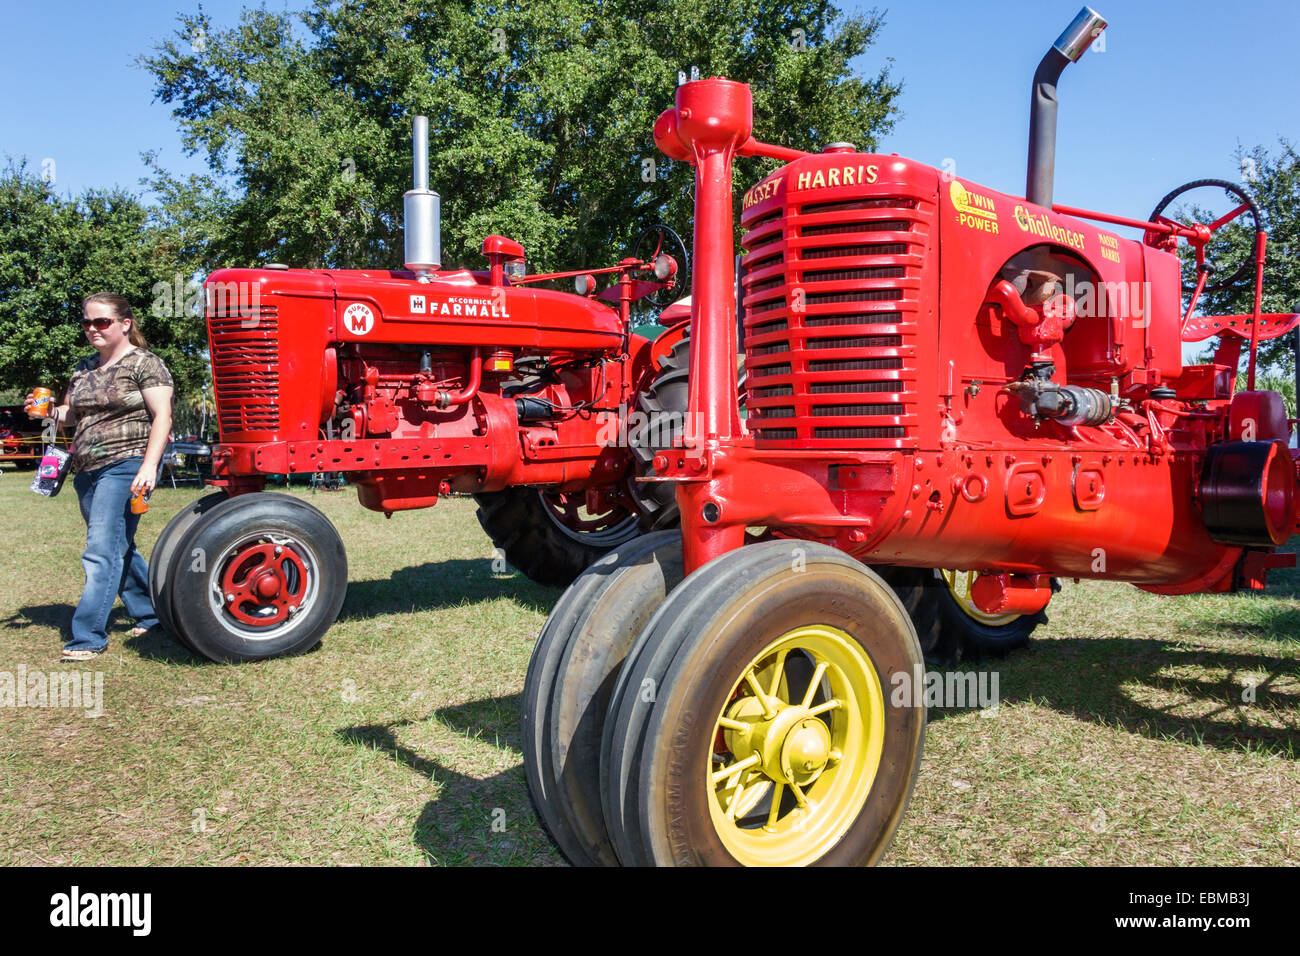 Lake Wales Florida,Lake Wailes,public park,Pioneer Days,festival,annual event,celebration,red,antique,tractors,product products display sale,Massey-Ha Stock Photo